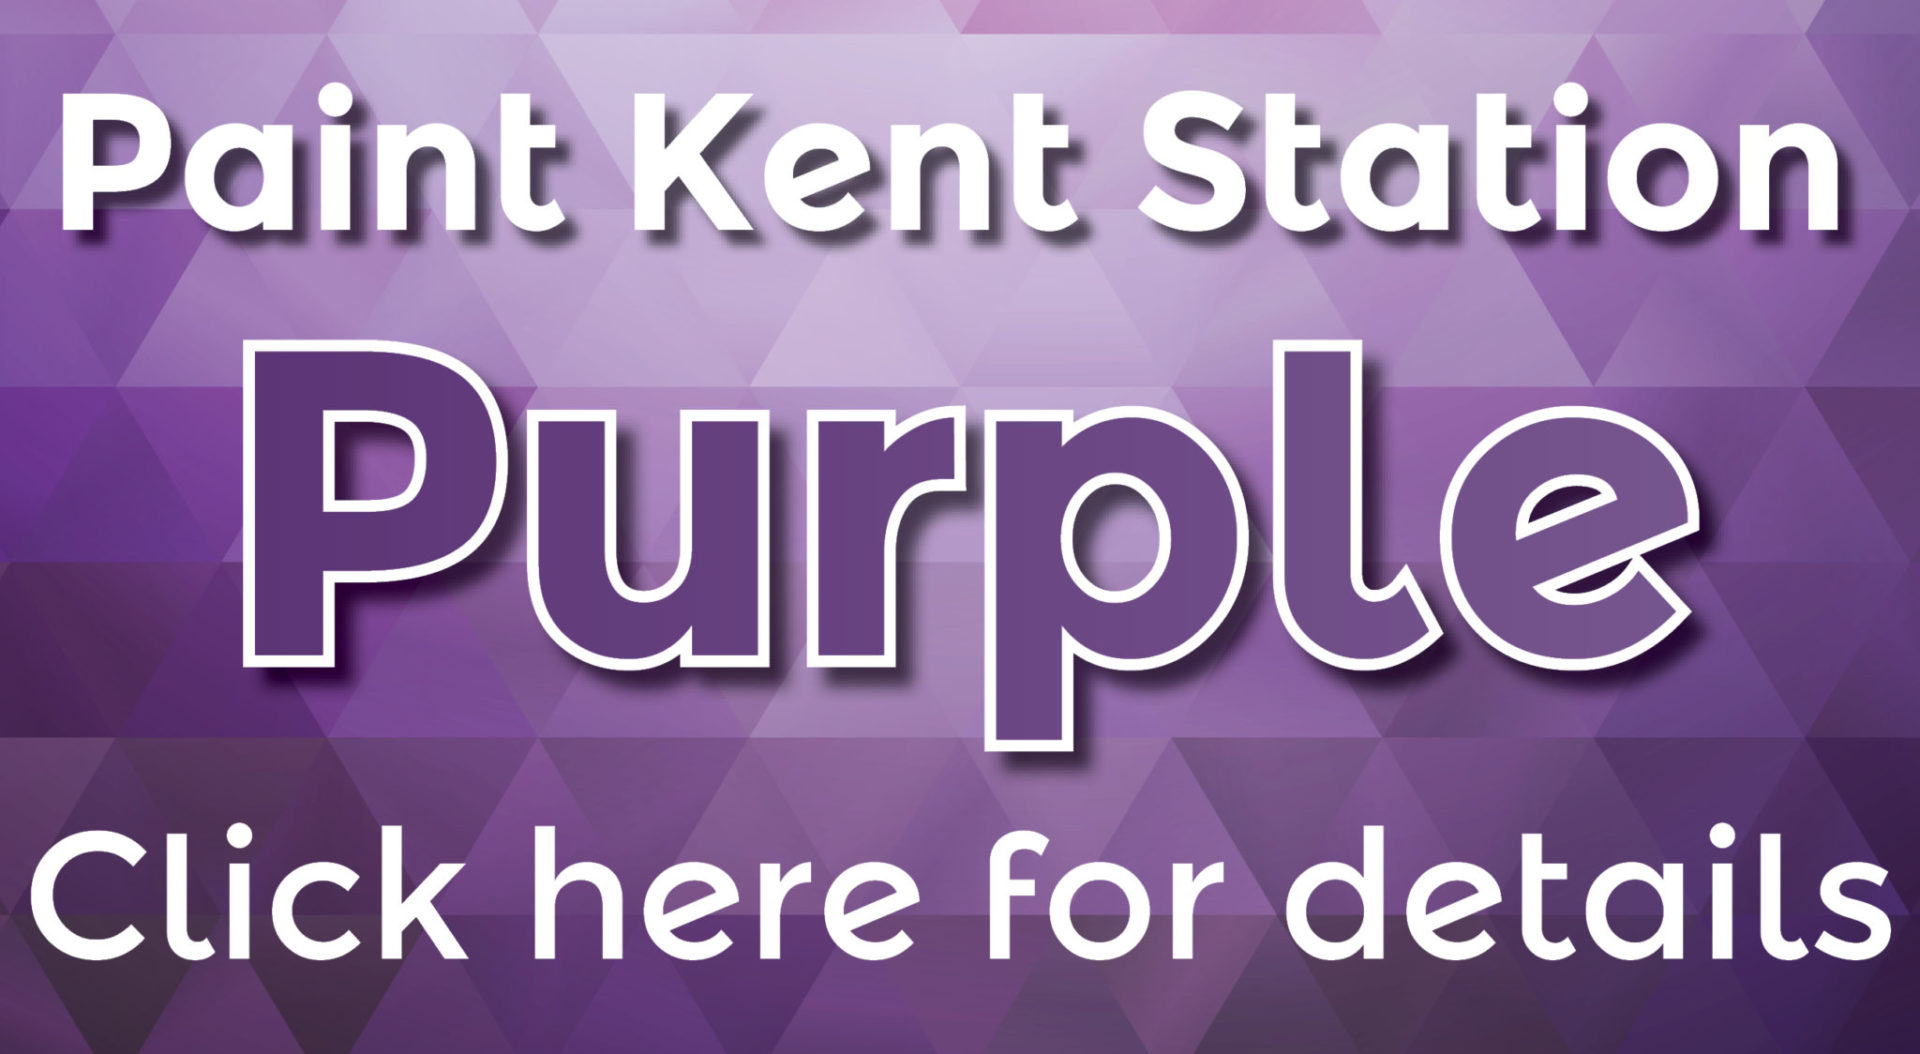 Paint Kent Station Purple in May to Raise Money for Relay for Life Kent.